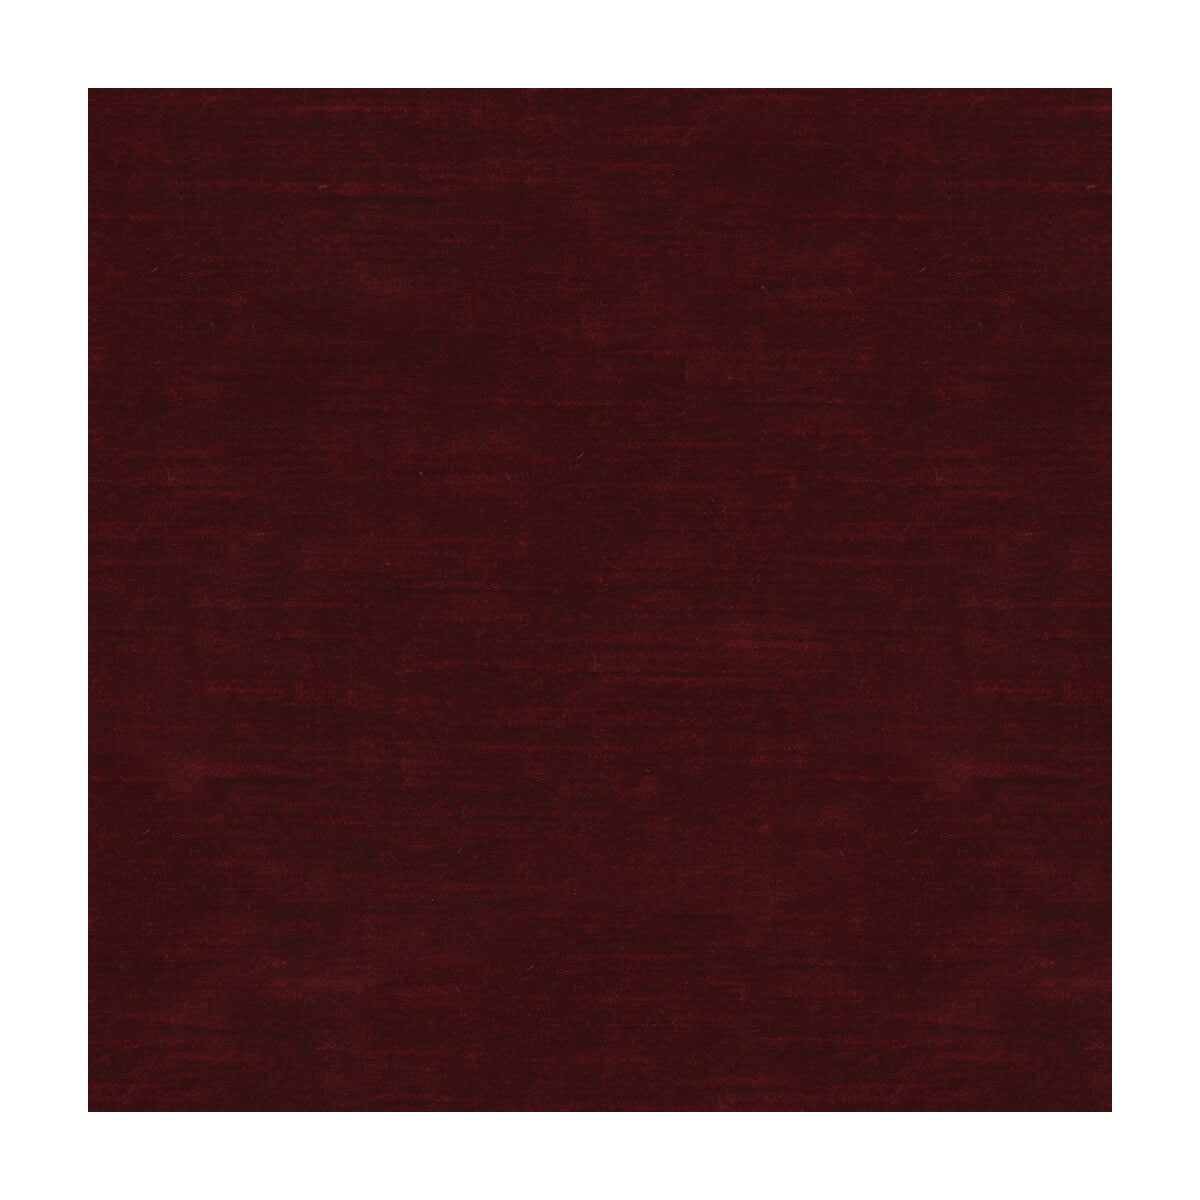 Lazare Velvet fabric in ruby color - pattern 8016103.919.0 - by Brunschwig &amp; Fils